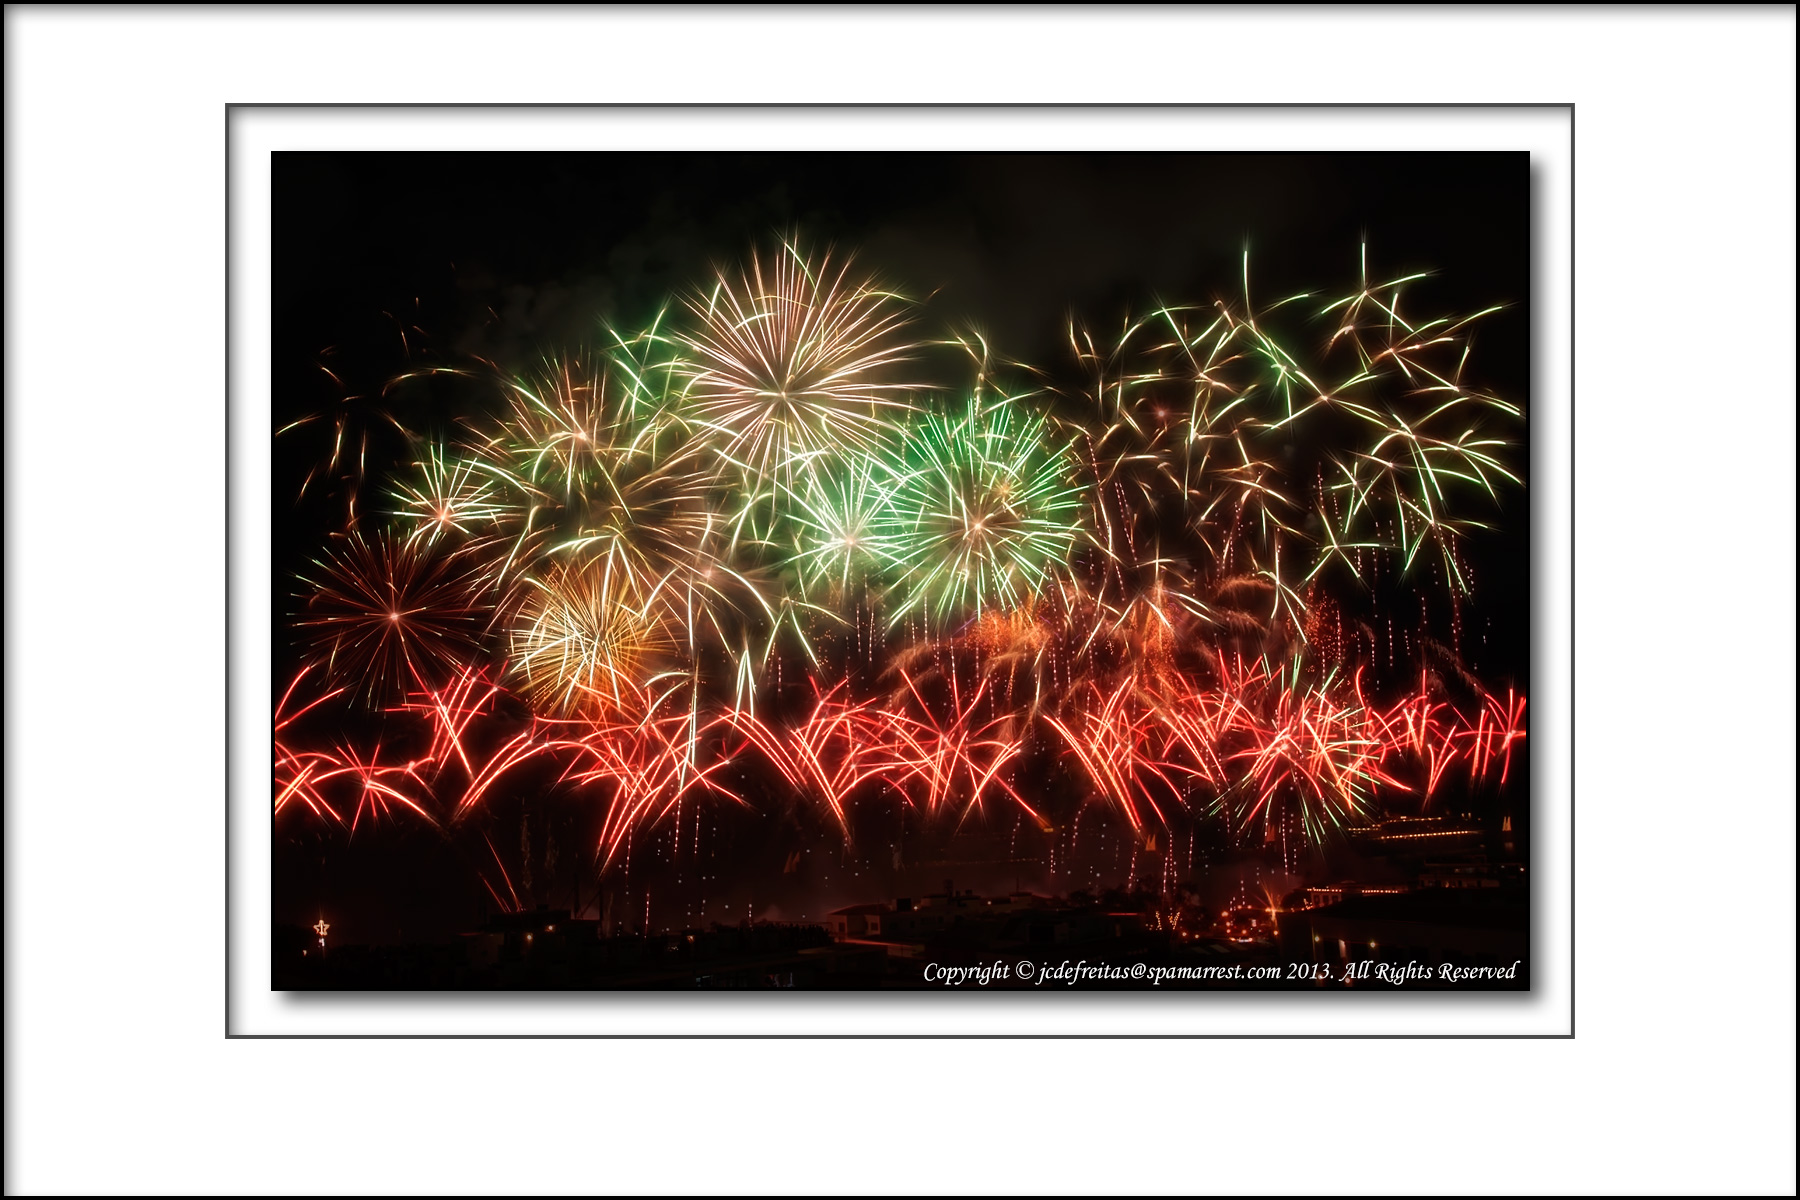 2010/11 - New Year Fireworks - Funchal, Madeira - Portugal